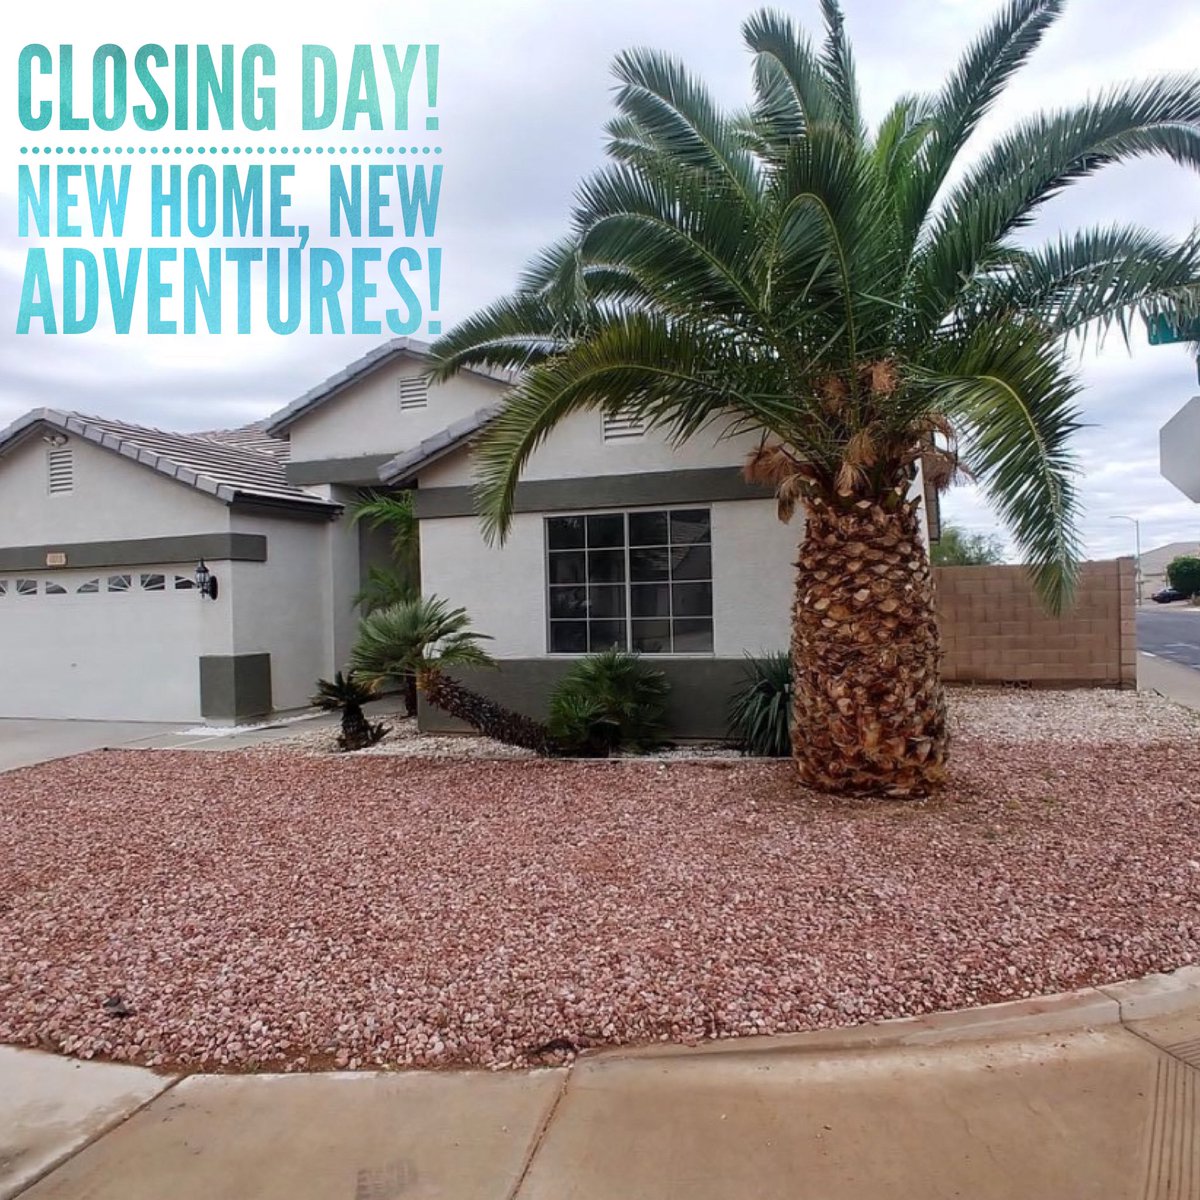 Recent closes in #Buckeye and #ElMirage in #Arizona! So happy to help these amazing families find their perfect home. 💕🏡 New Home, New Adventurs! #realestate #movingtoaz #movingtophoenix #movetoaz #newhome #firstimehomebuyer